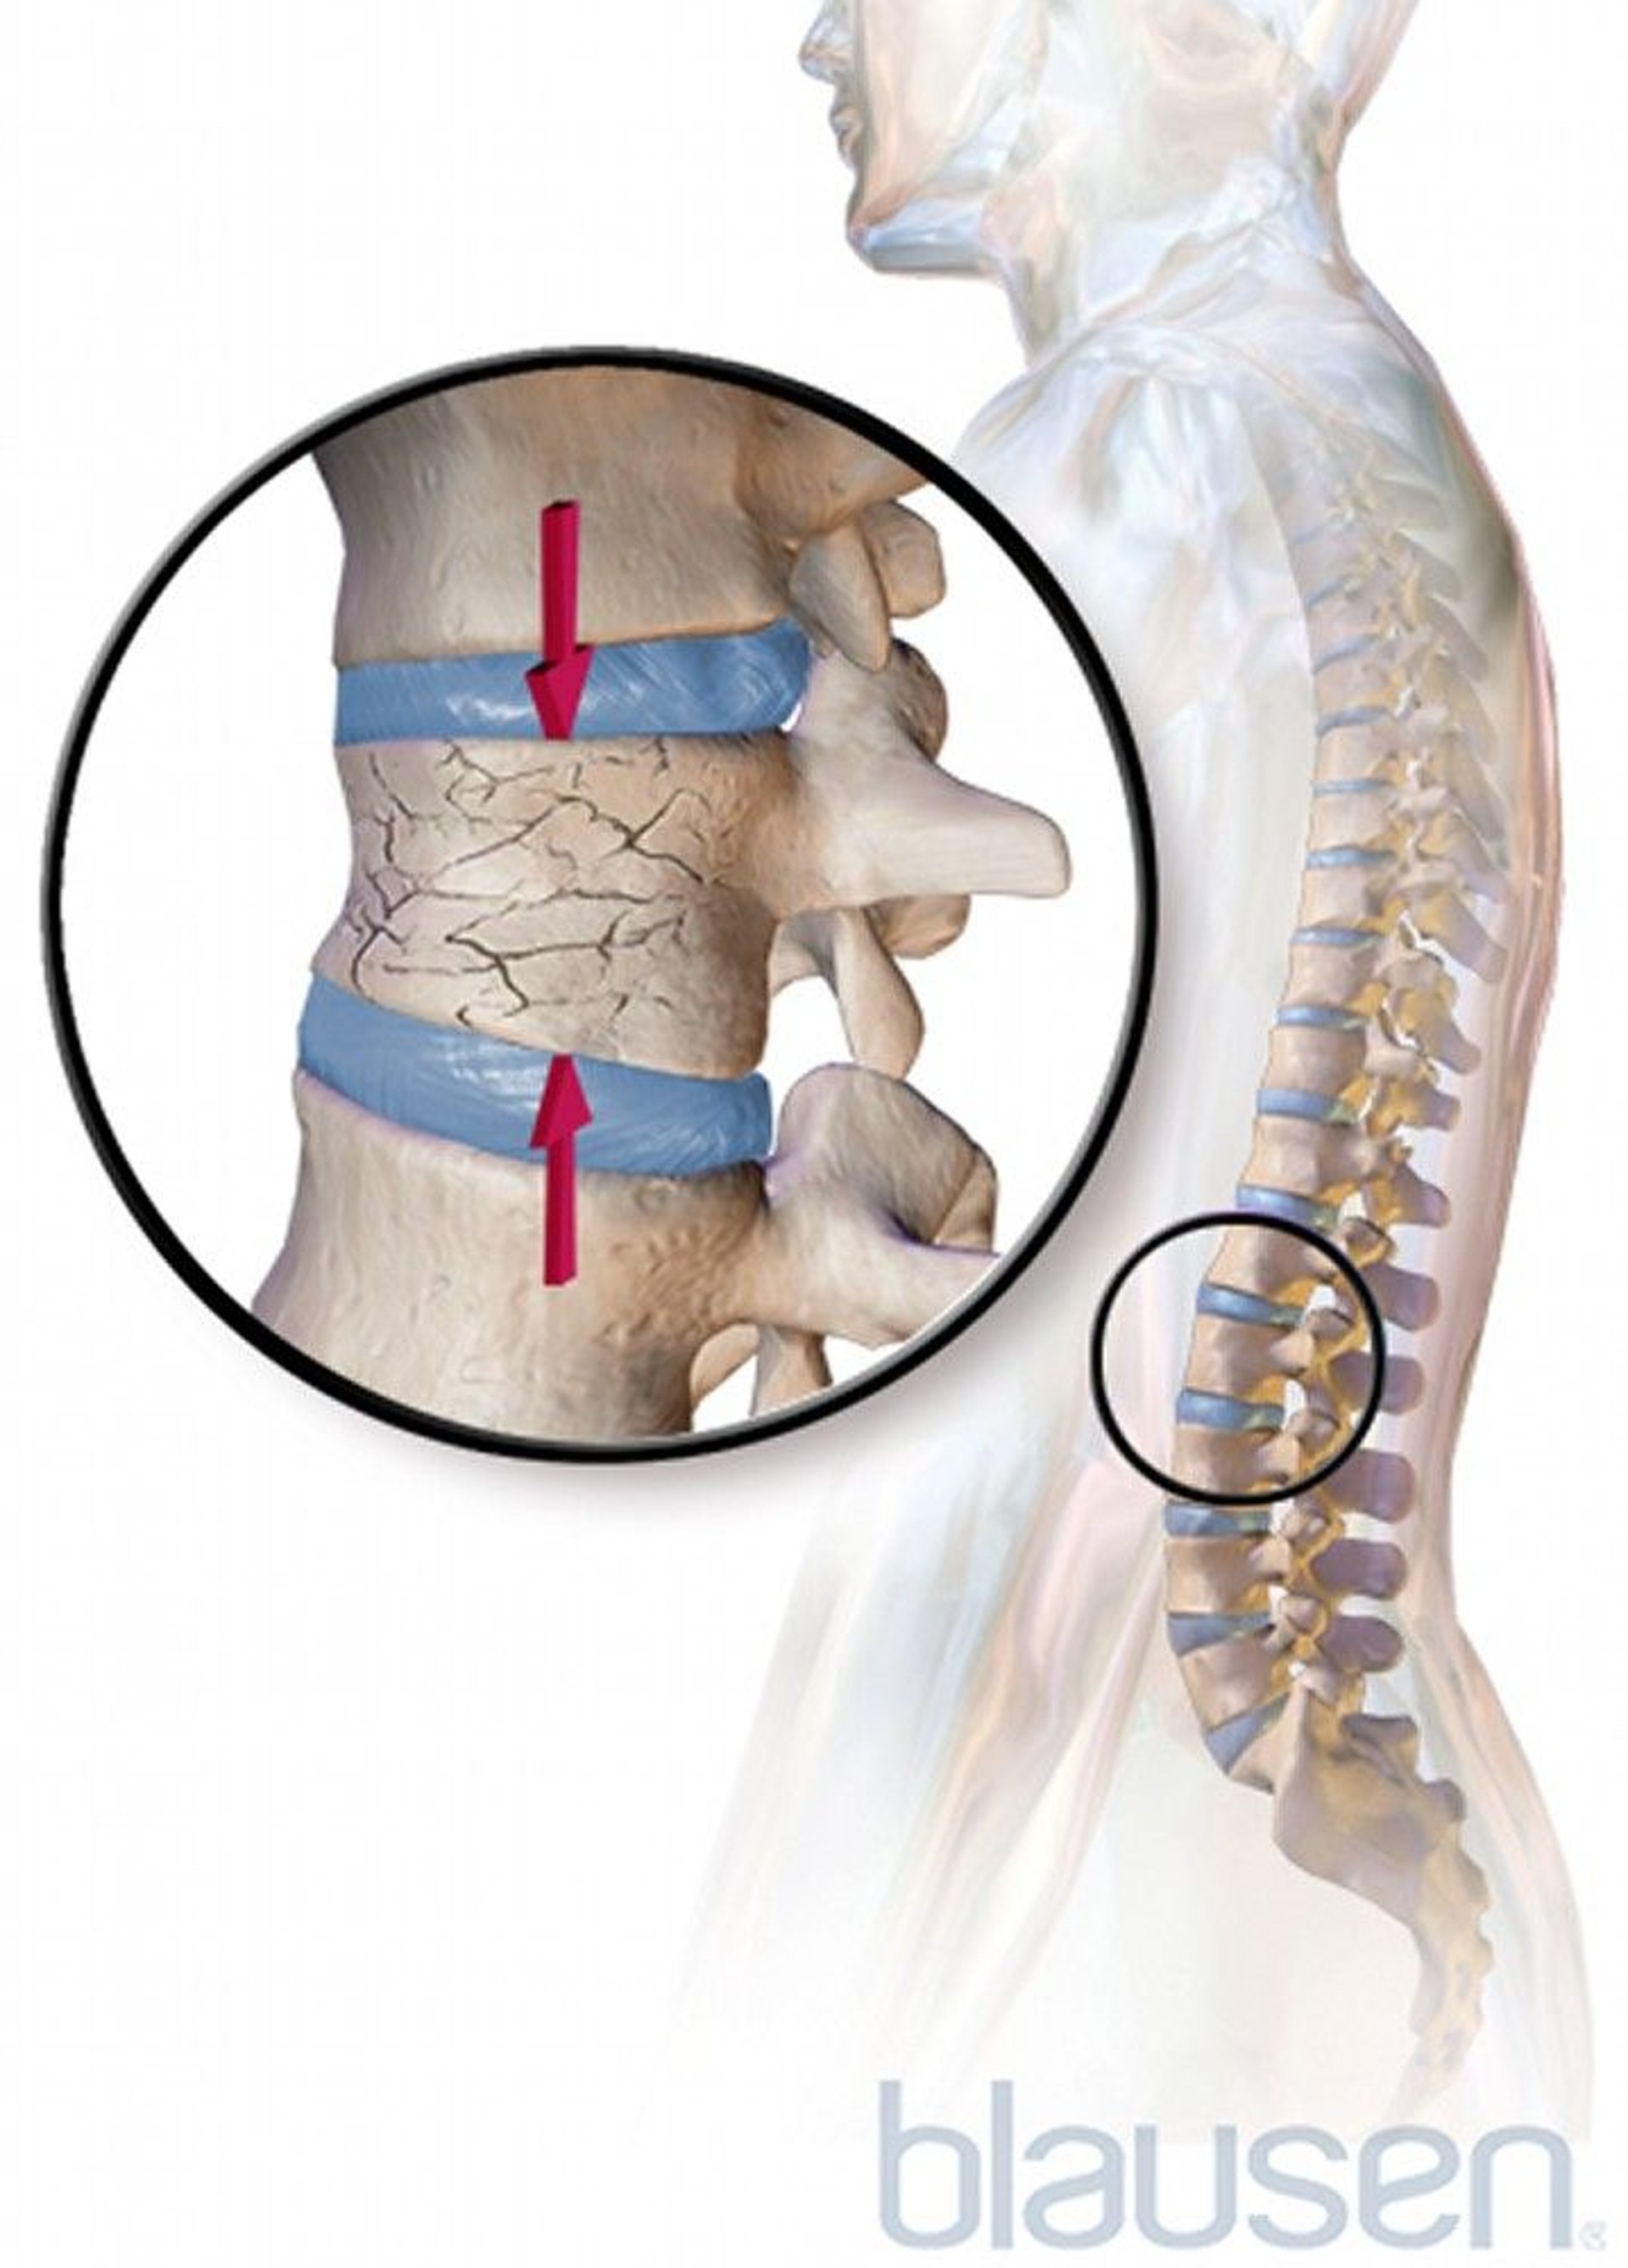 Compression Fracture of the Spine Due to Osteoporosis